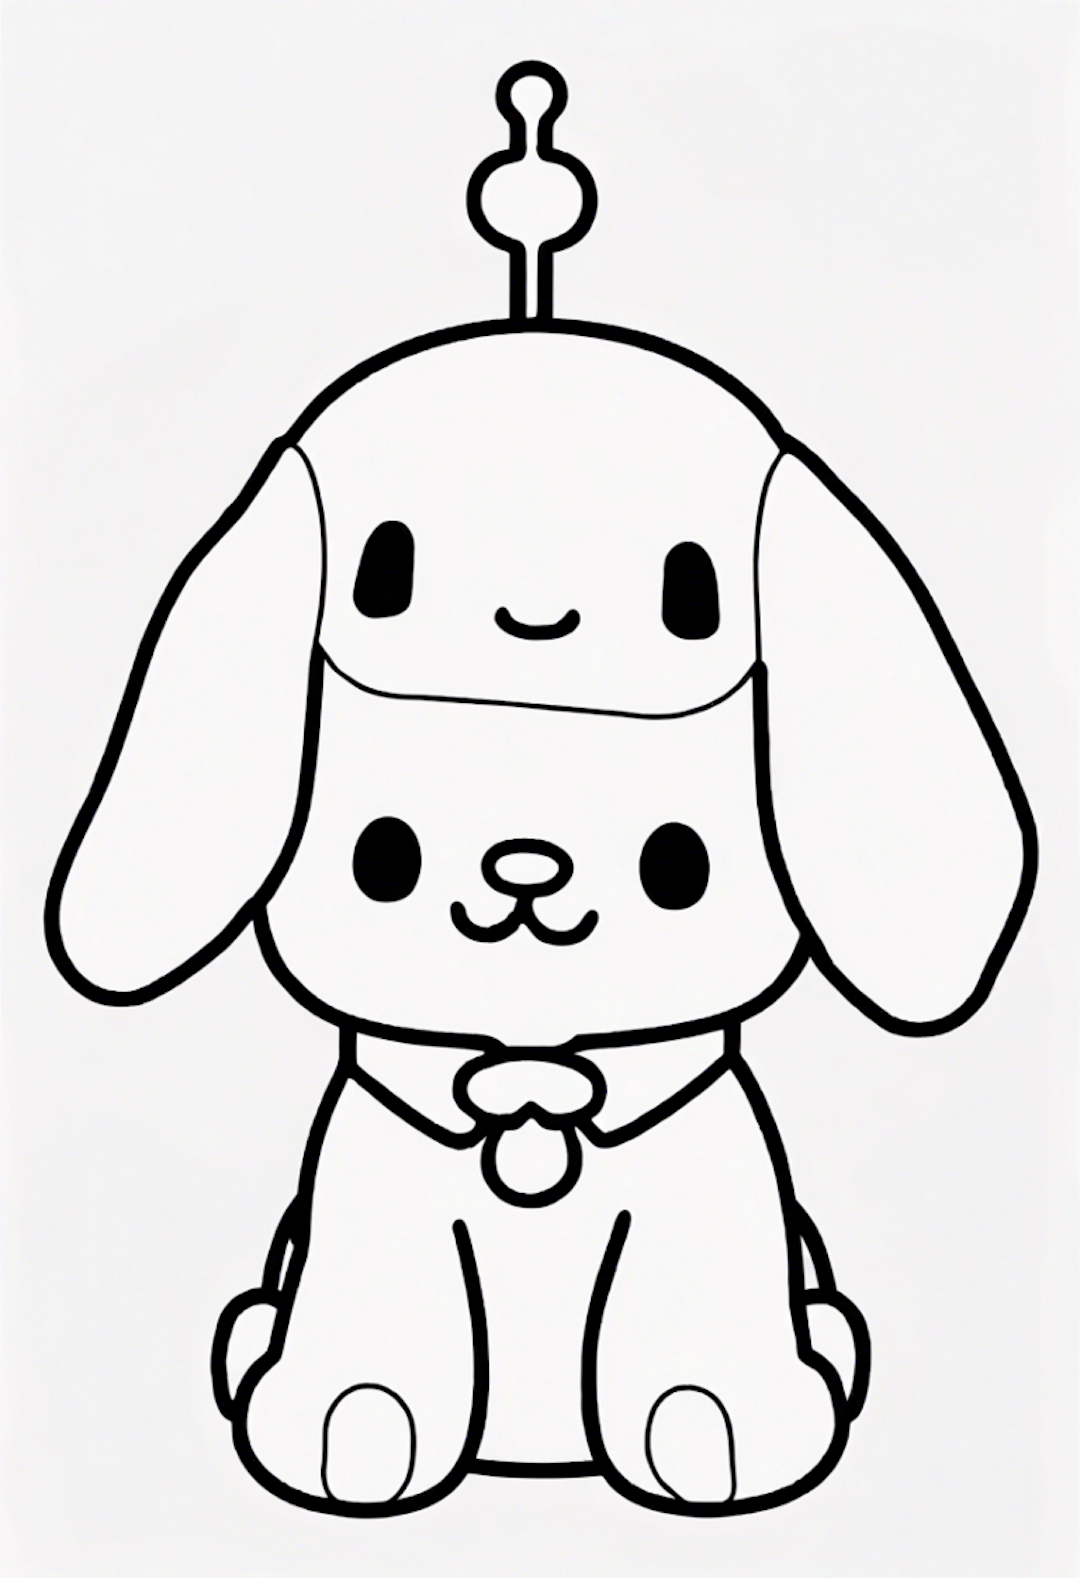 “Cinnamoroll and Friends Coloring Fun” coloring pages